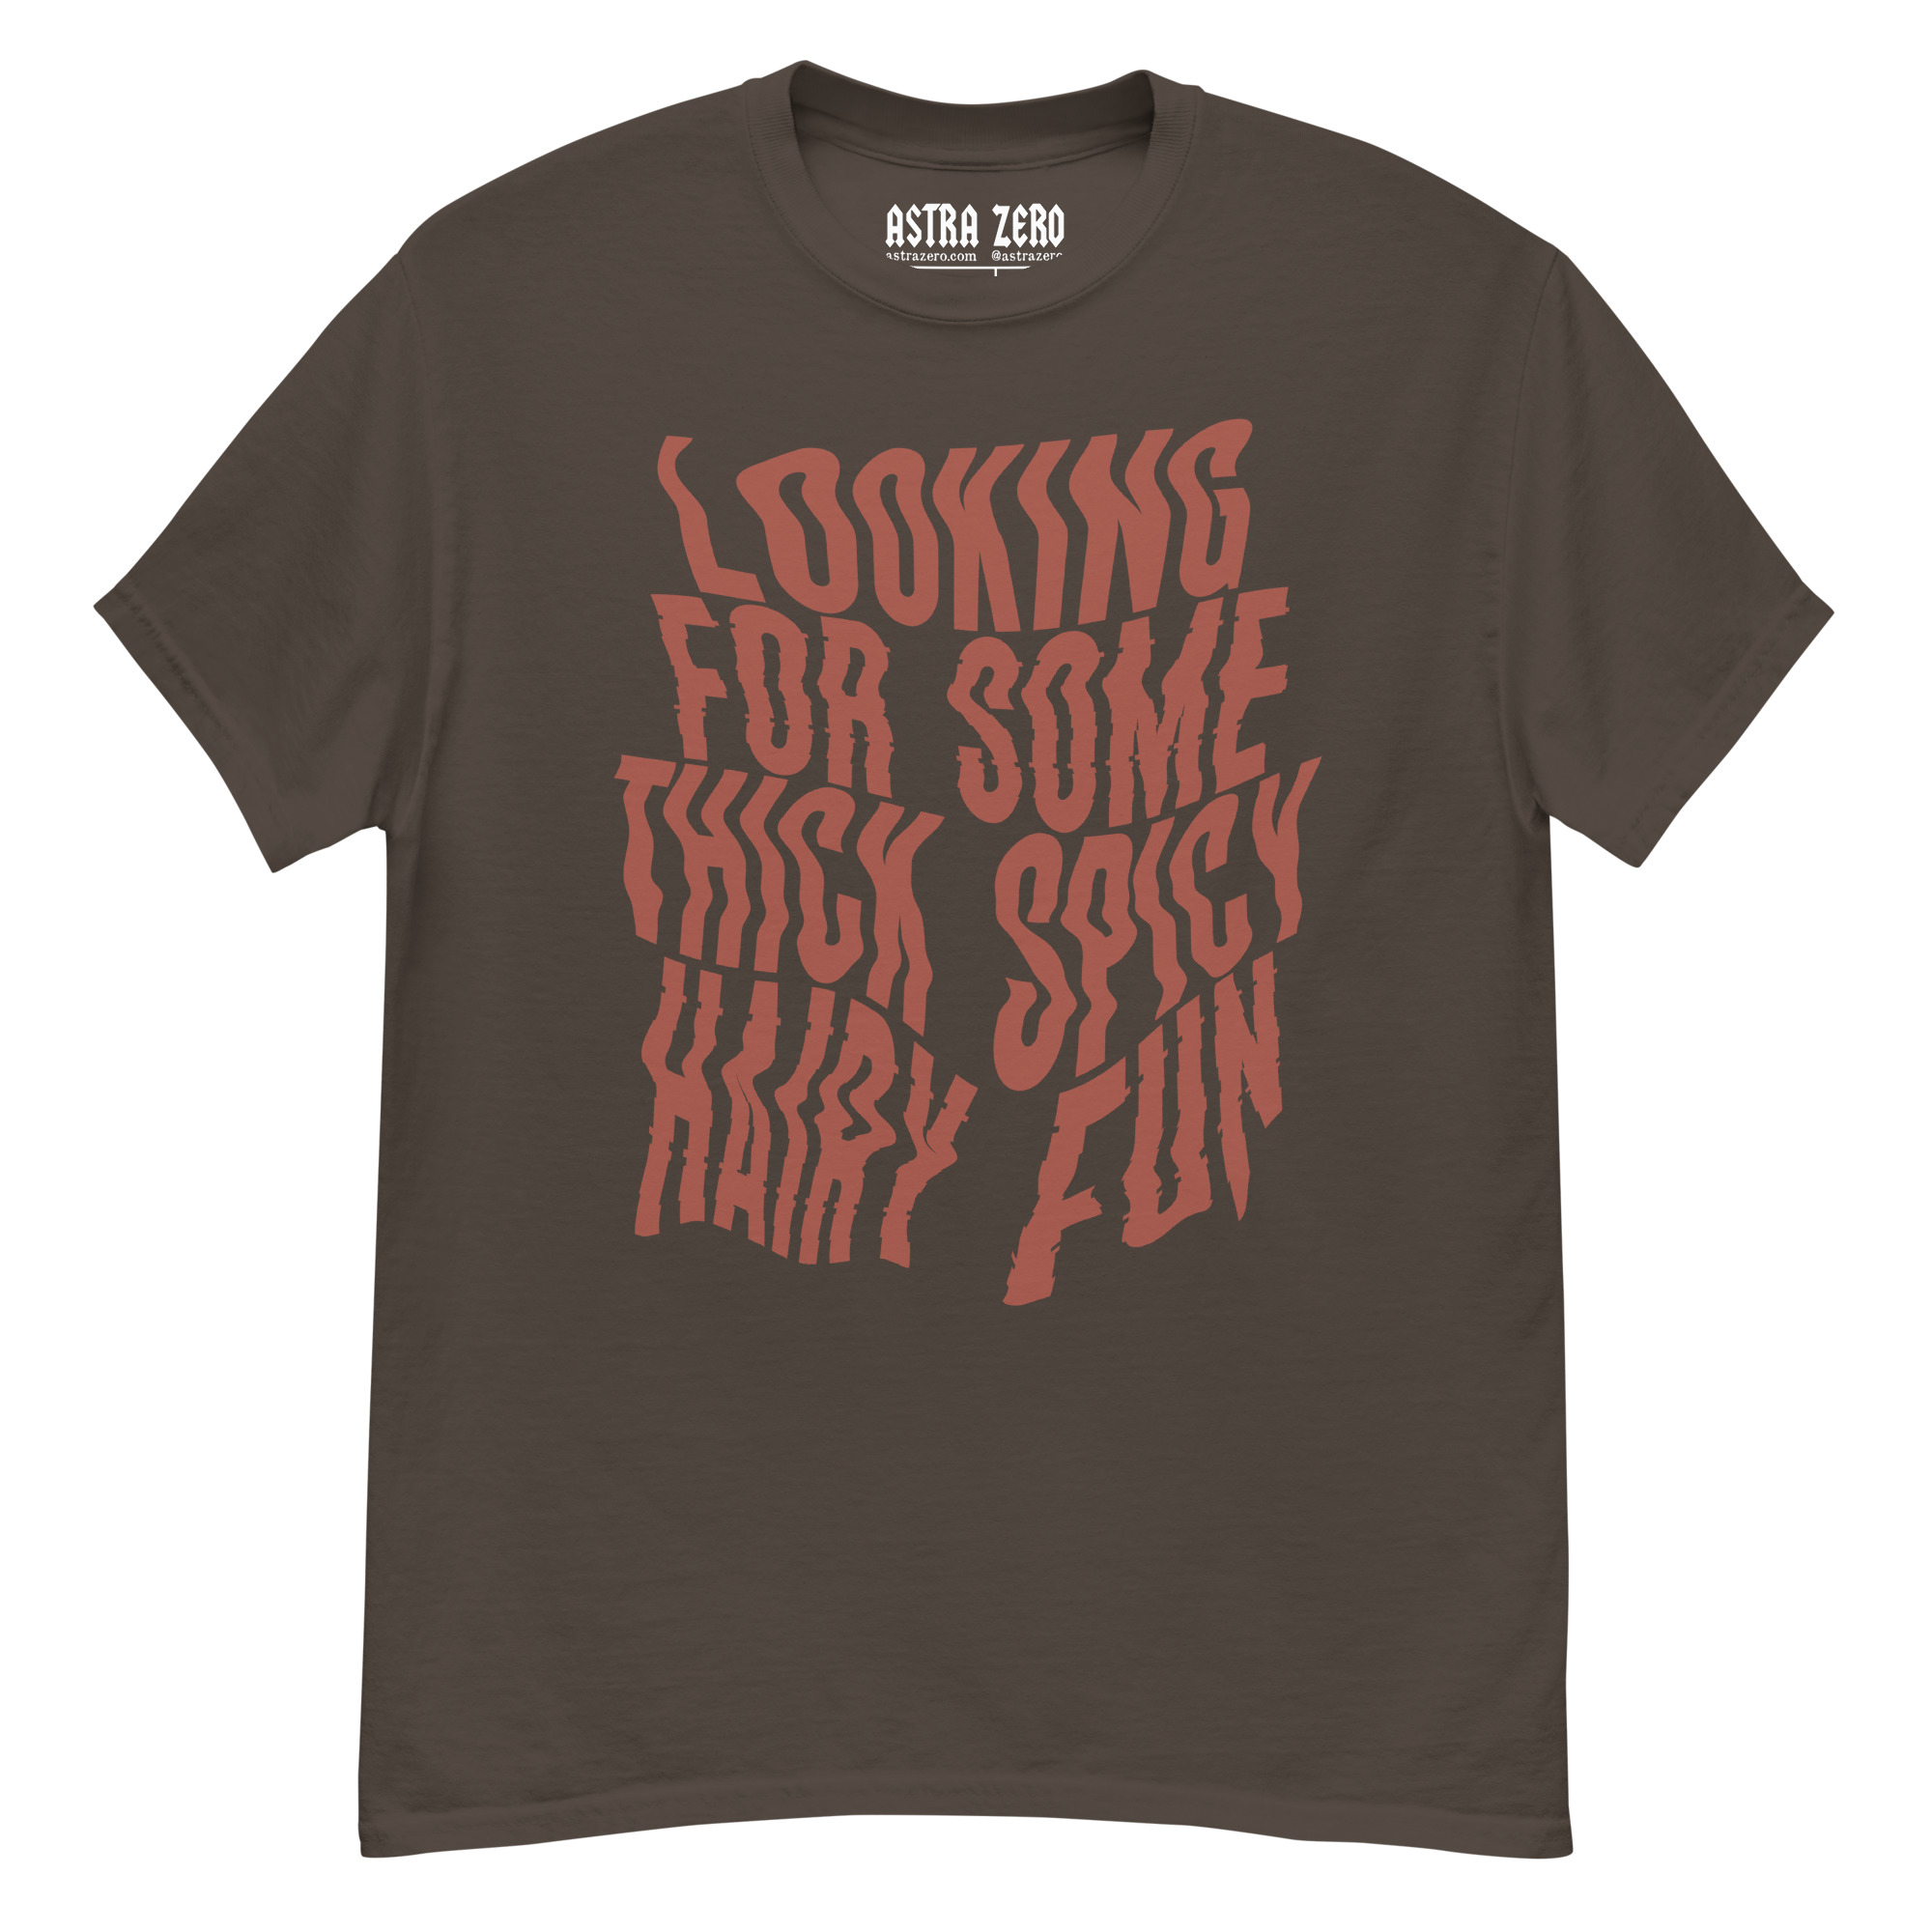 Featured image for “Looking for some Thick Spicy Hairy Fun - Men's classic tee”